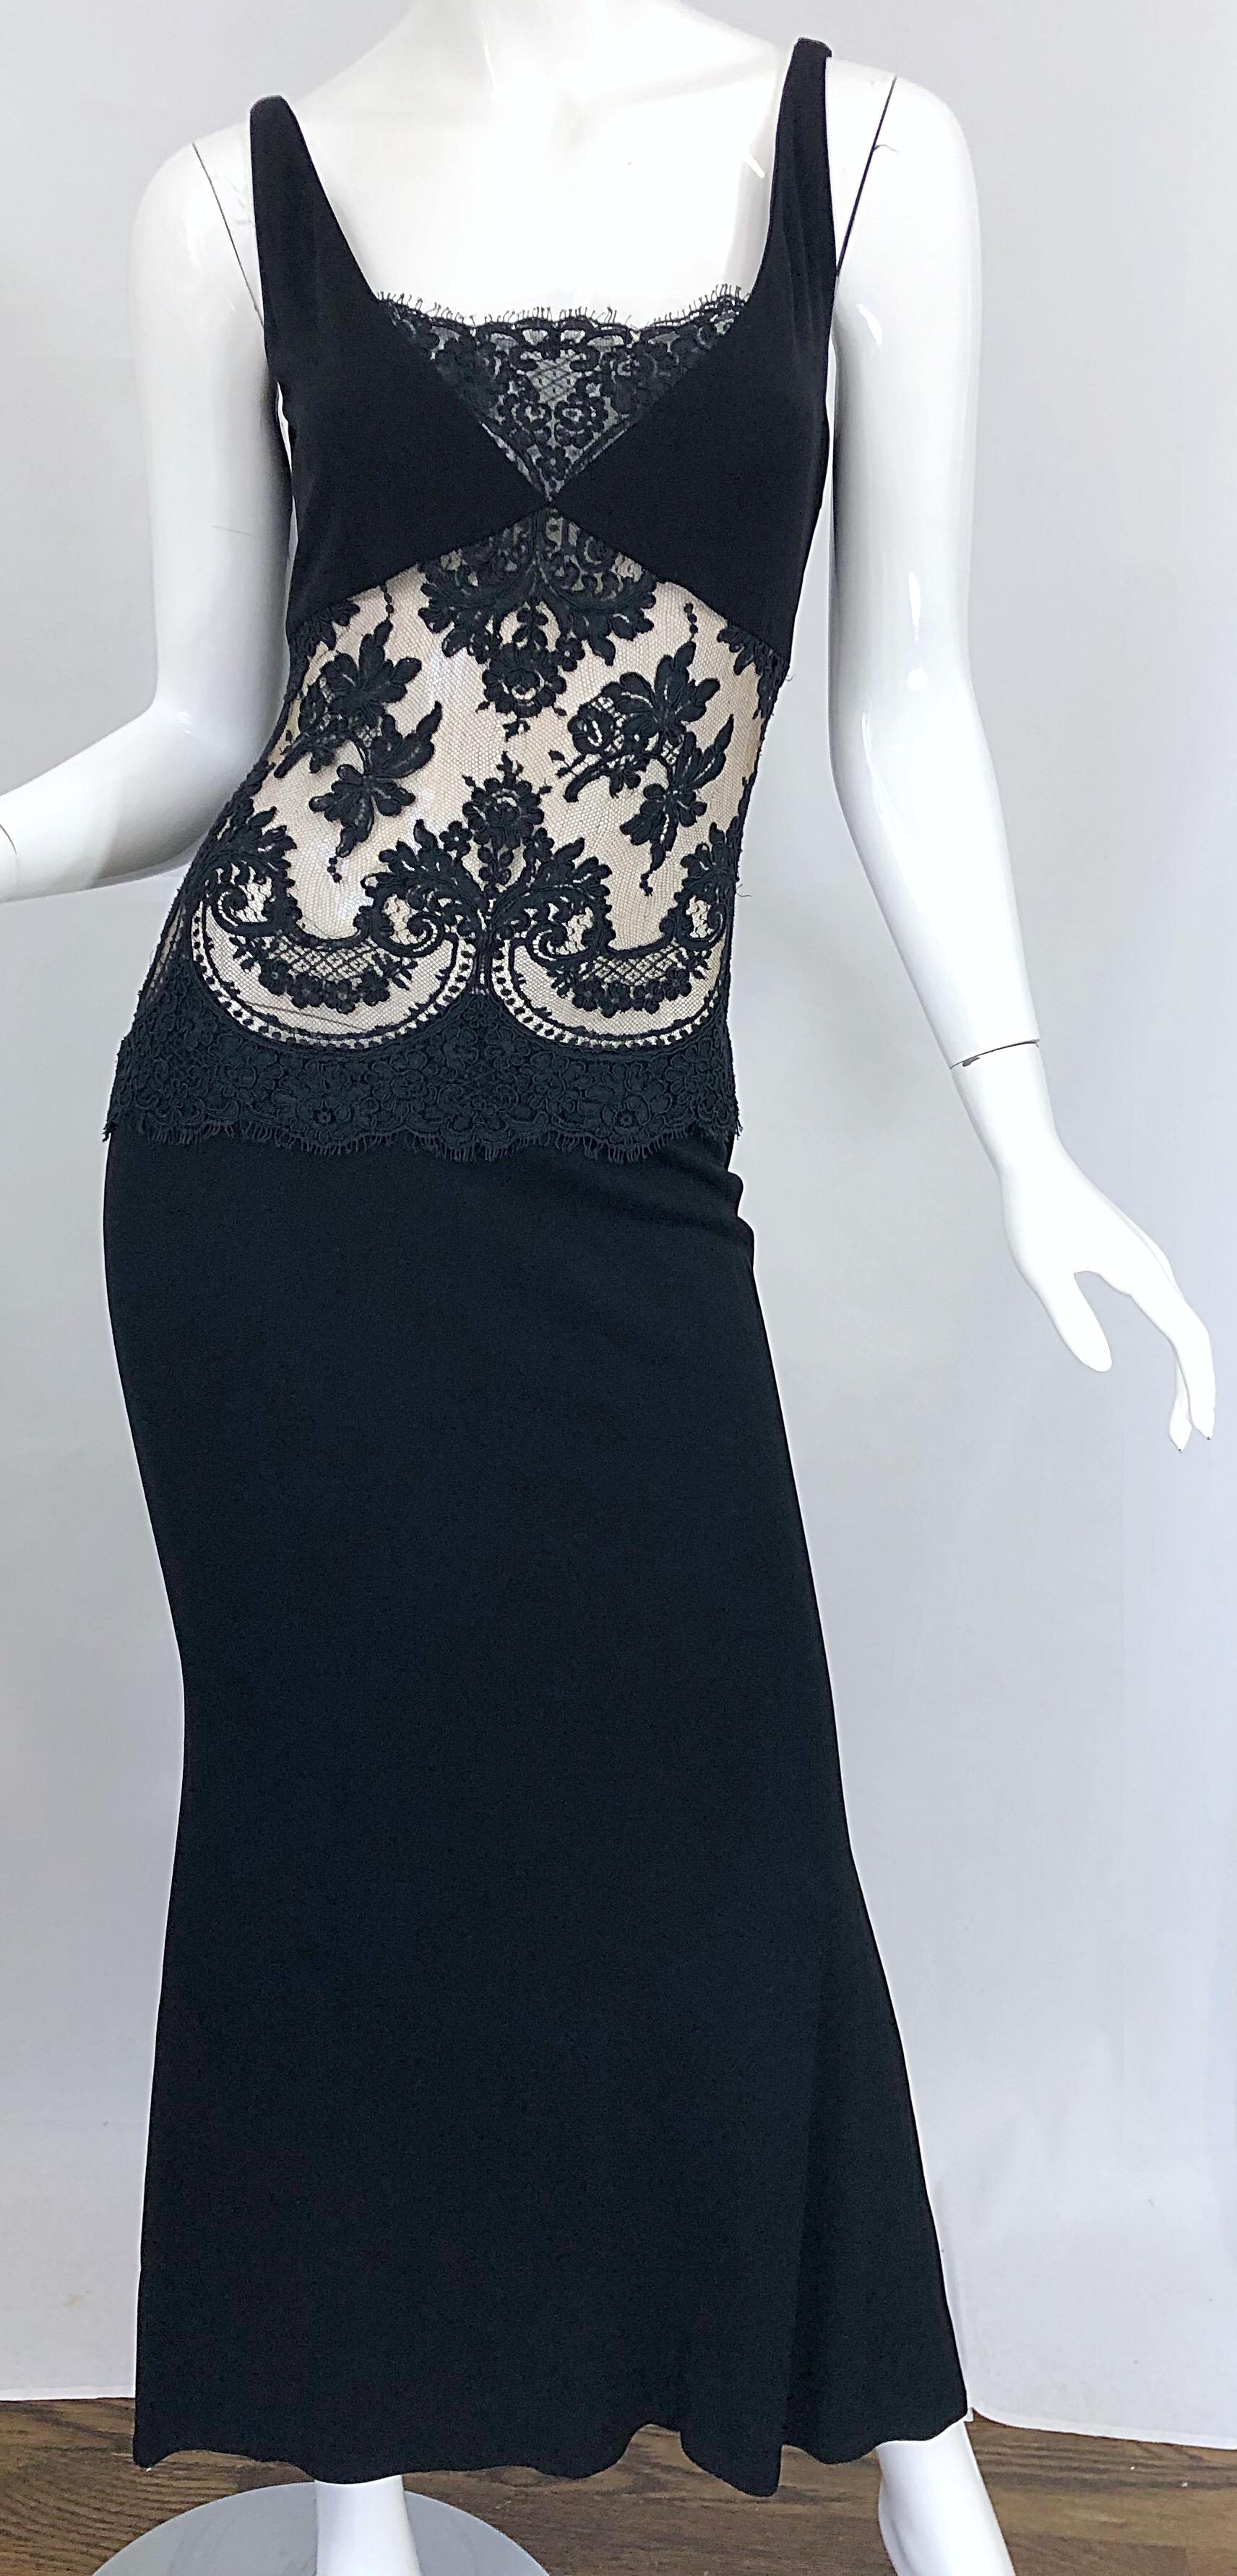 Women's 1990s Randolph Duke Black Sexy Lace Cut-Out Sleeveless Vintage 90s Evening Gown